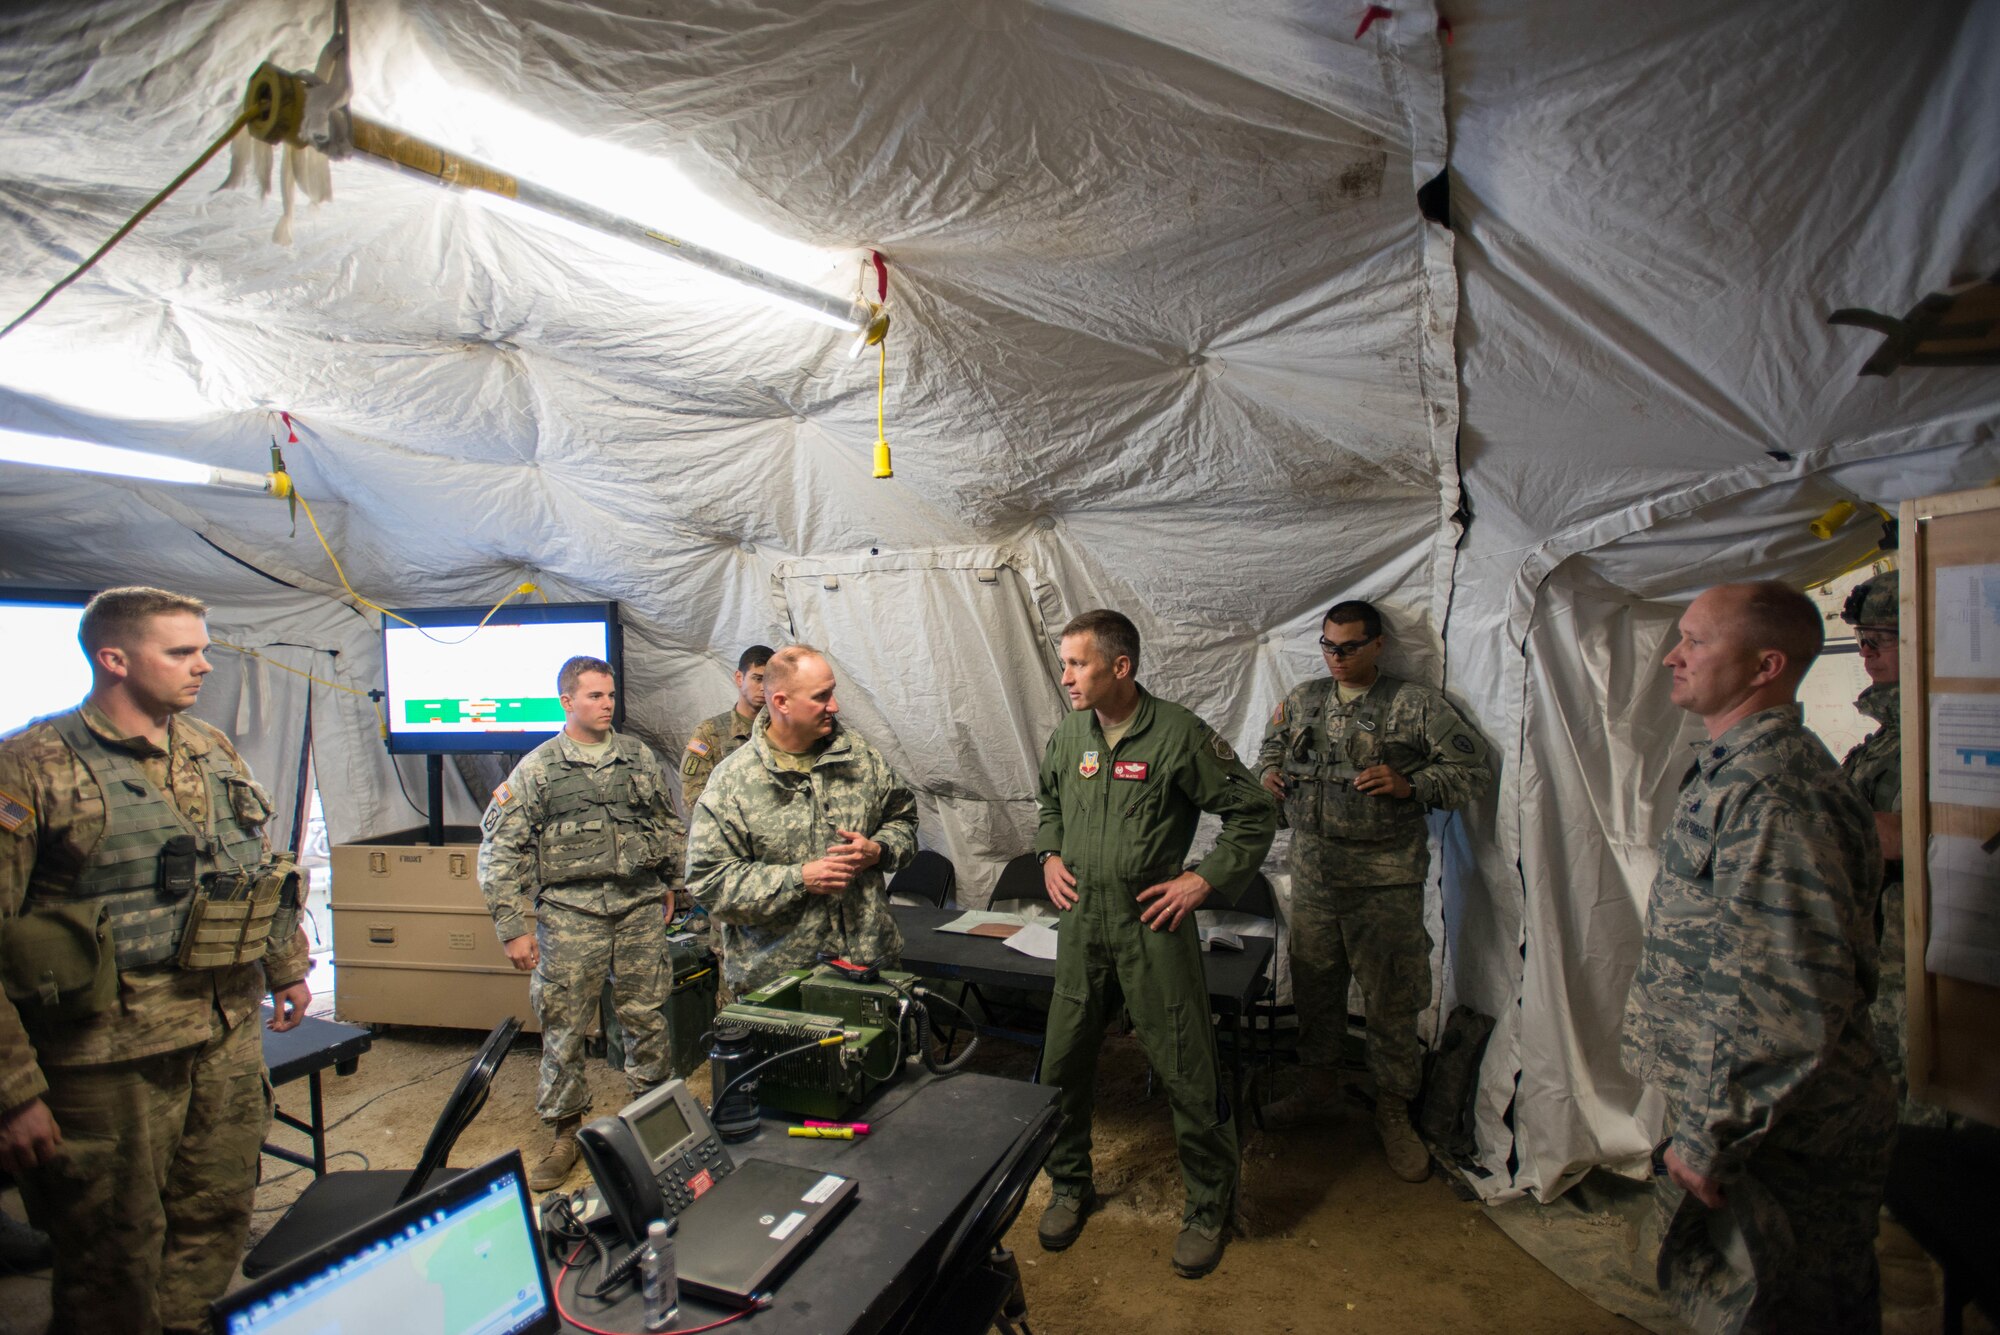 U.S. Air Force Col. Patrick McAtee, the Virginia Air National Guard’s 192nd Operations Group commander out of Joint Base Langley-Eustis, Va., serving on temporary duty as the deployed forces commander for RED FLAG-Alaska (RF-A) 16-2, center, is briefed on operations by U.S. Army commanders from the 1st Battalion, 24th Infantry Regiment, Fort Wainwright, Alaska, June 8, 2016, while visiting the Joint Pacific Alaska Range Complex (JPARC) during RF-A 16-2. The JPARC provides a realistic training environment and allows commanders to train for full spectrum engagements, ranging from individual kills to complex, large-scale joint engagements. (U.S. Air Force photo by Senior Airman Joshua Weaver/Released)